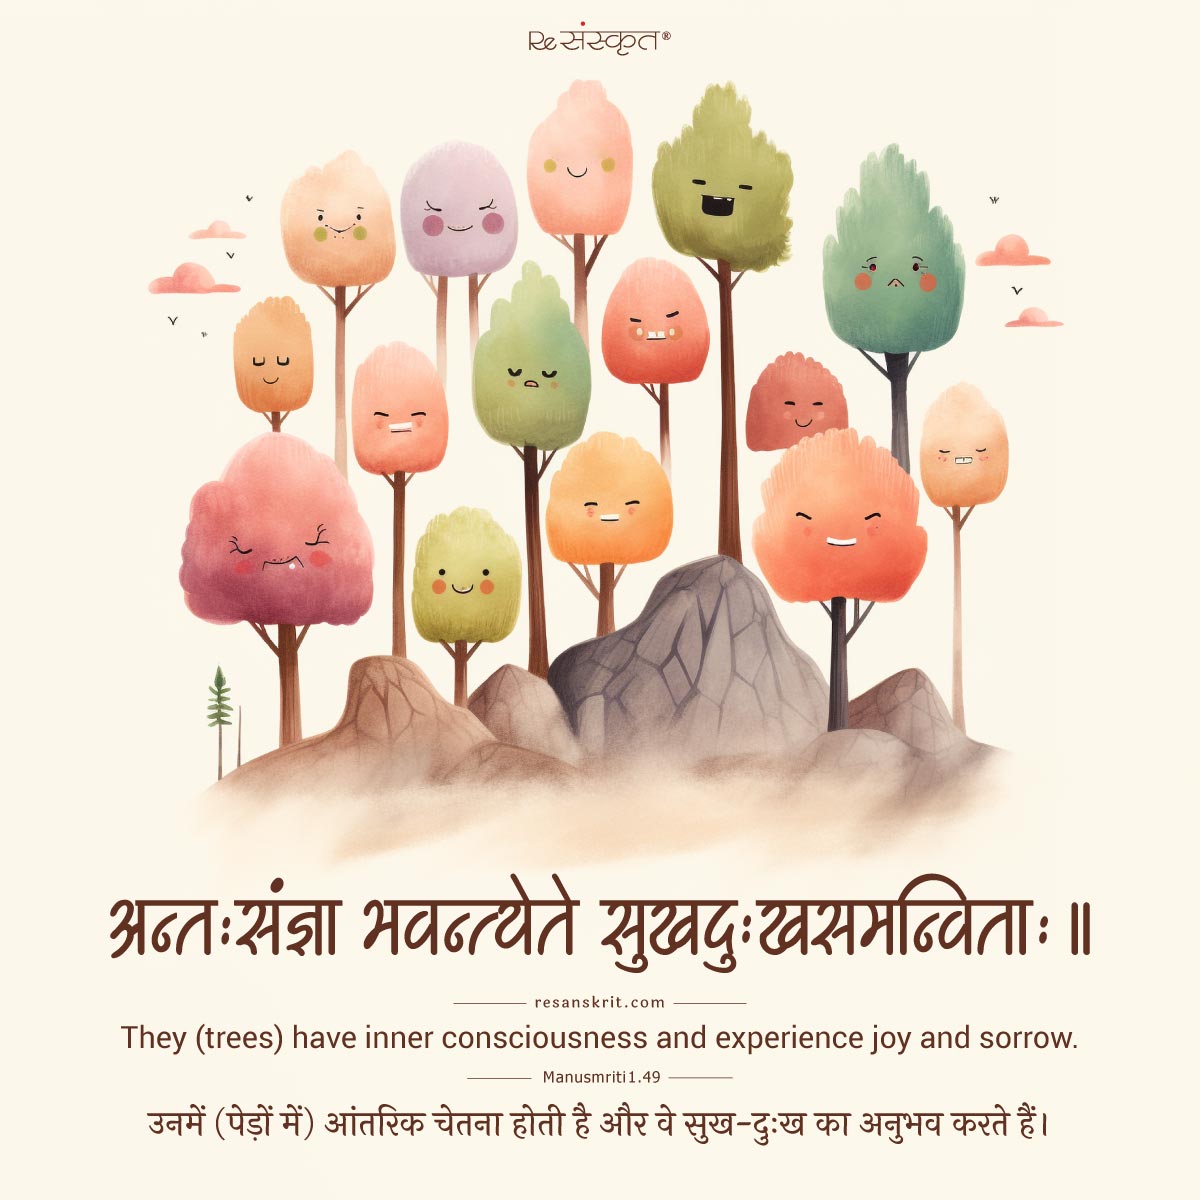 Sanskrit quote - Trees And consciousness